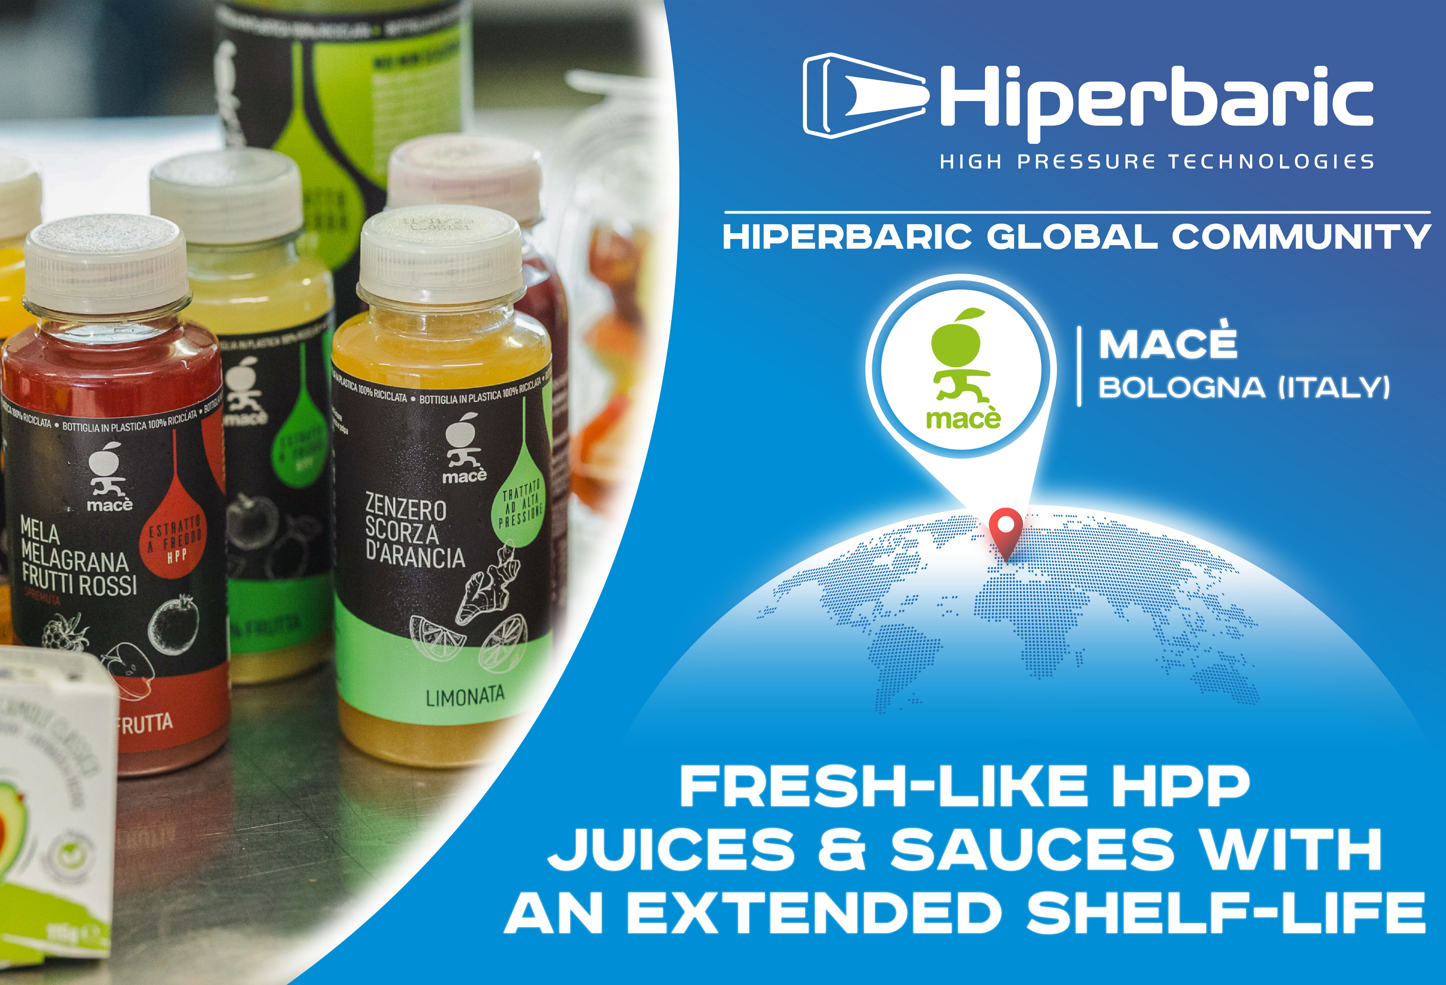 Mac and Hiperbaric partner with HPP technology for stabilising fruit juices and fresh sauces